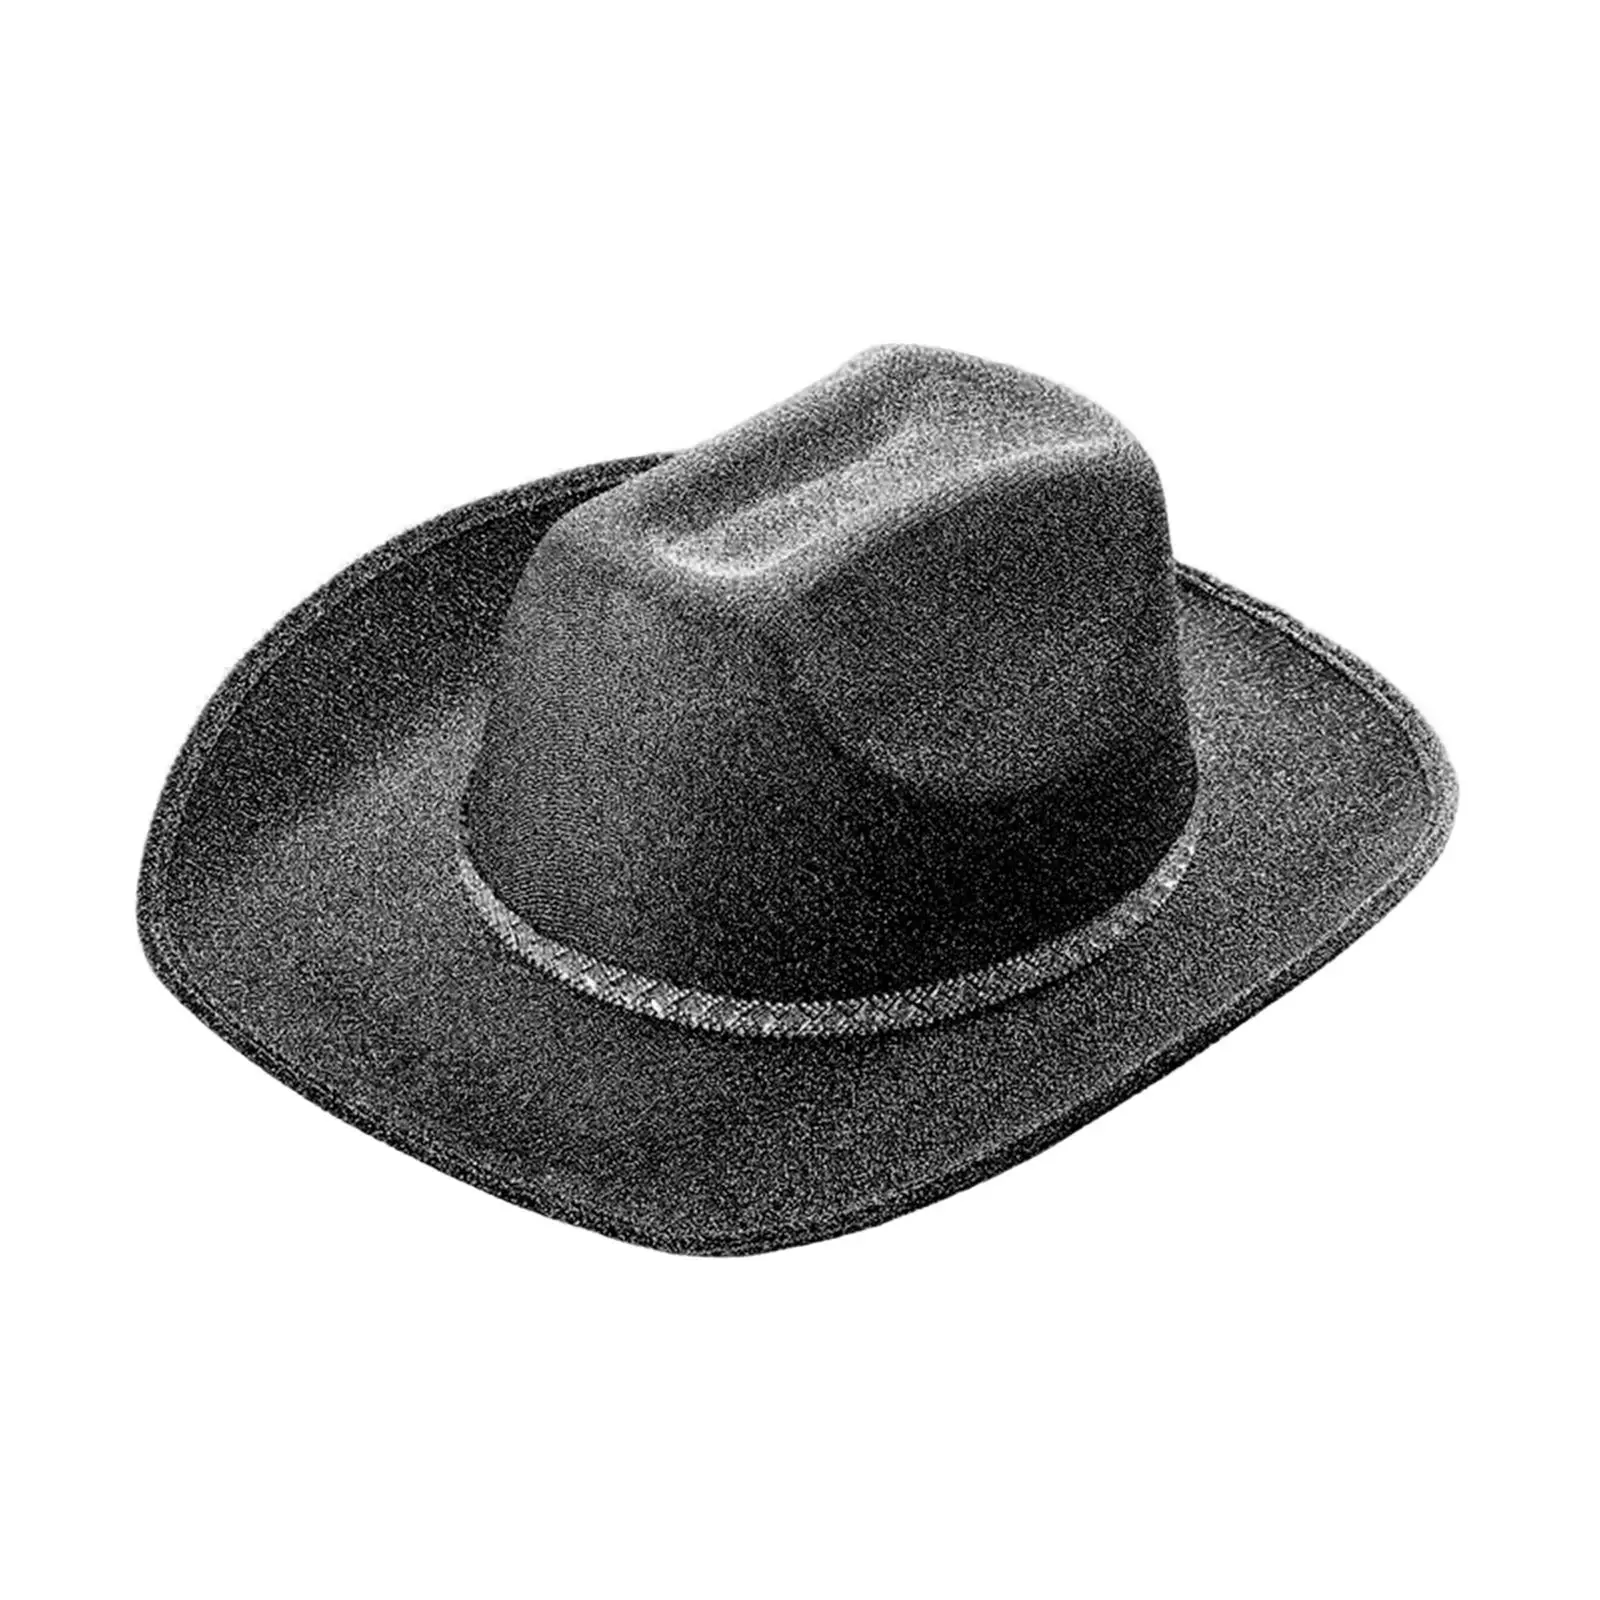 Novelty Cowgirl Hat Fedora Hat Jazz Hat Wide Brim Photo Props Party Hats Sunhat for Gift Role Play Girls Accessories Halloween